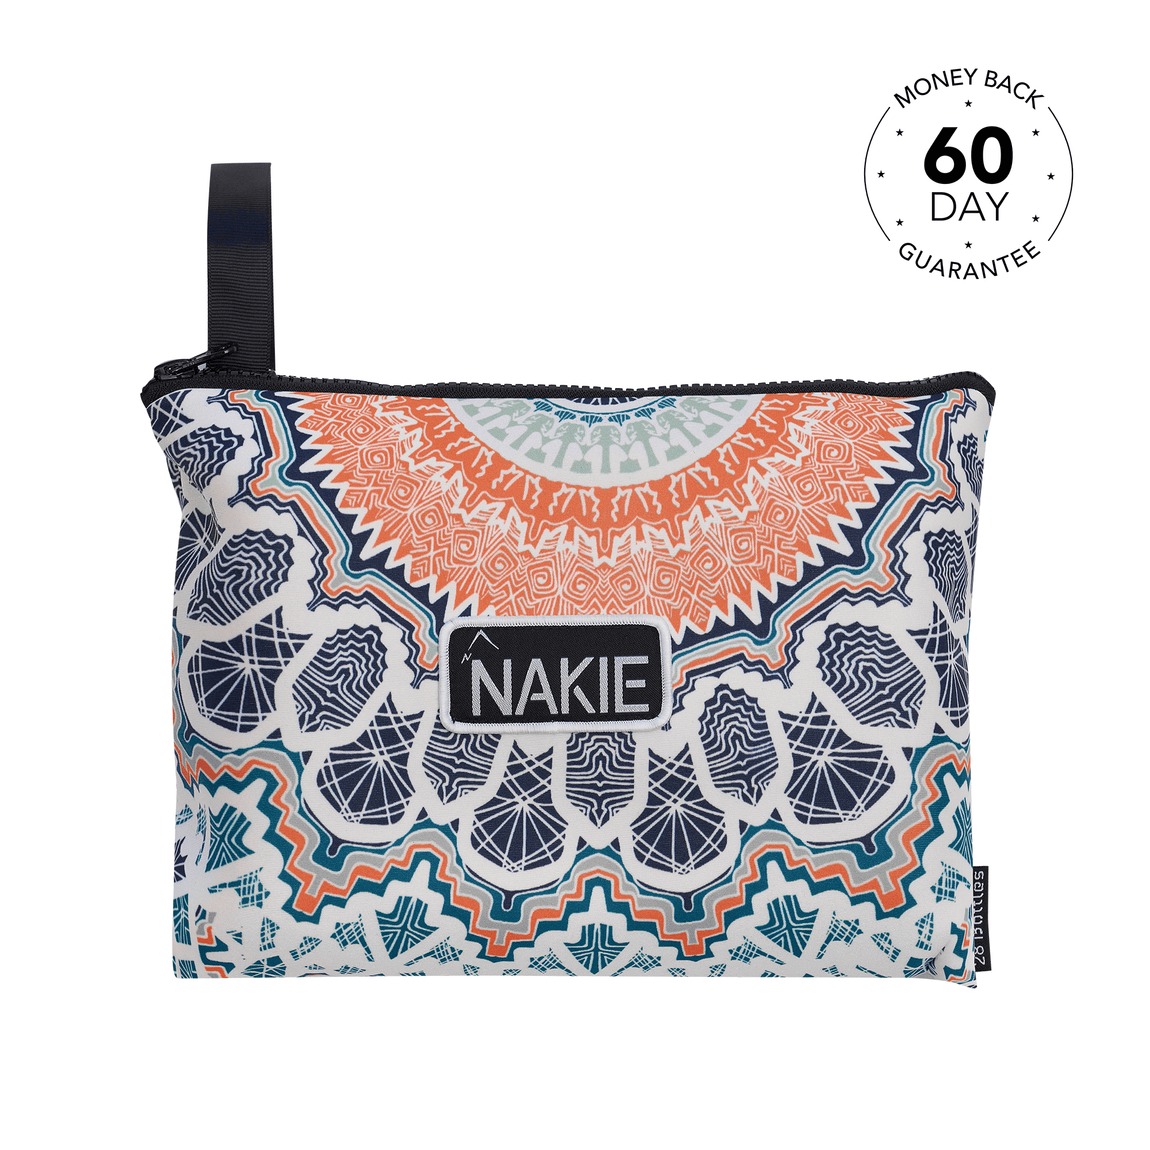 Captivating studio shot presenting Nakie's beach towel, highlighting its vibrant patterns and quick-drying fabric, essential for beach-goers seeking both style and functionality